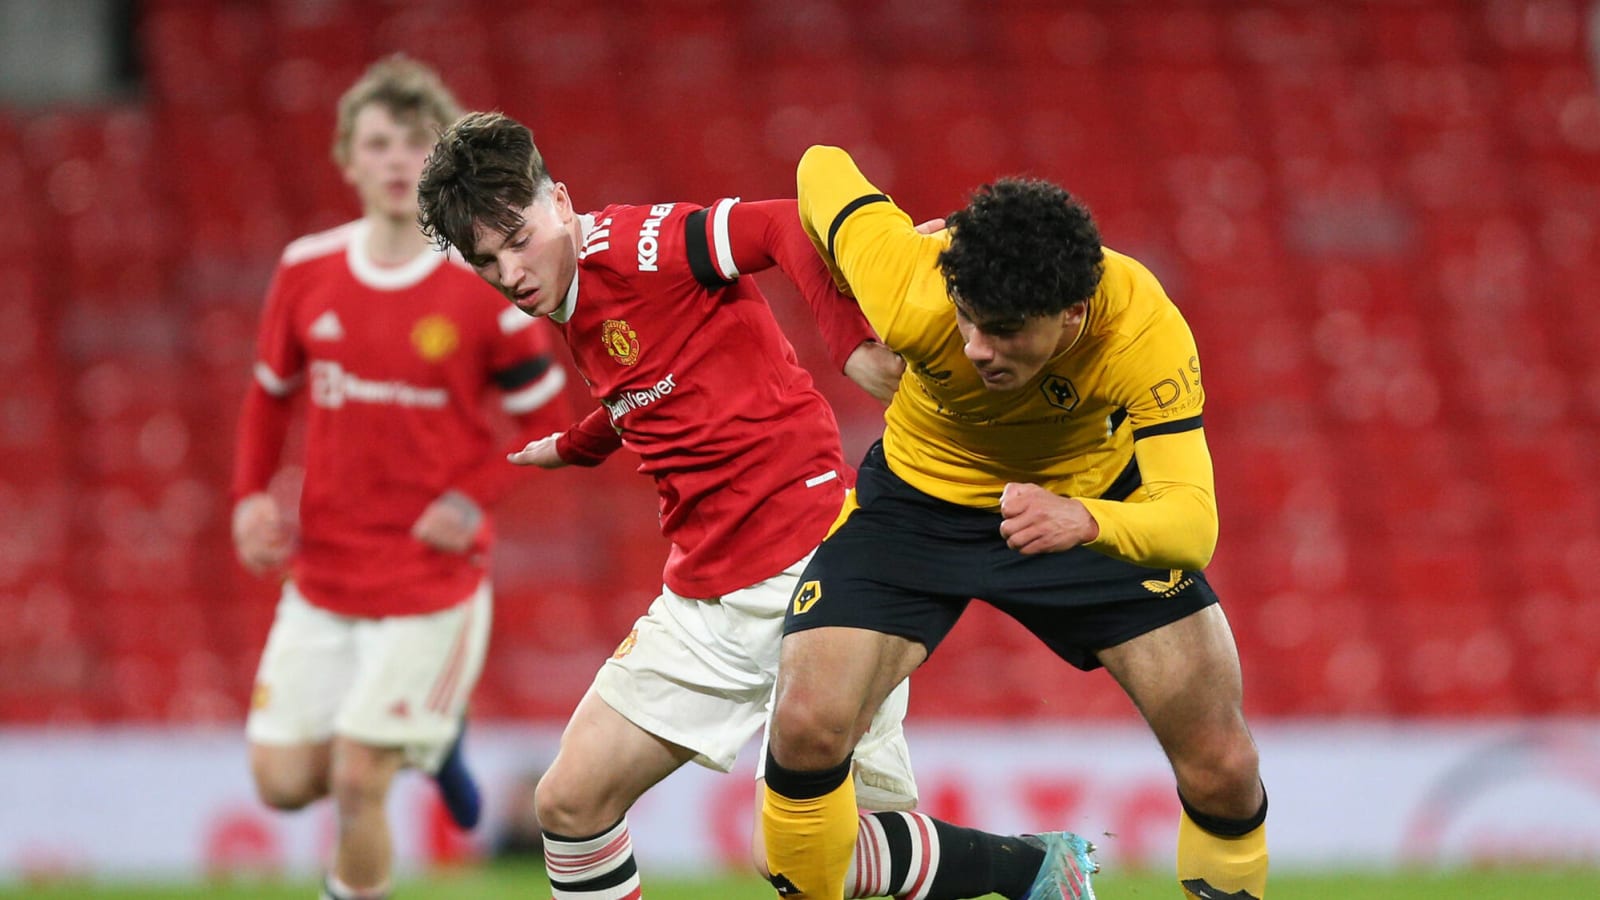 United loanee could return to the club this summer having made just one 54-minute cameo